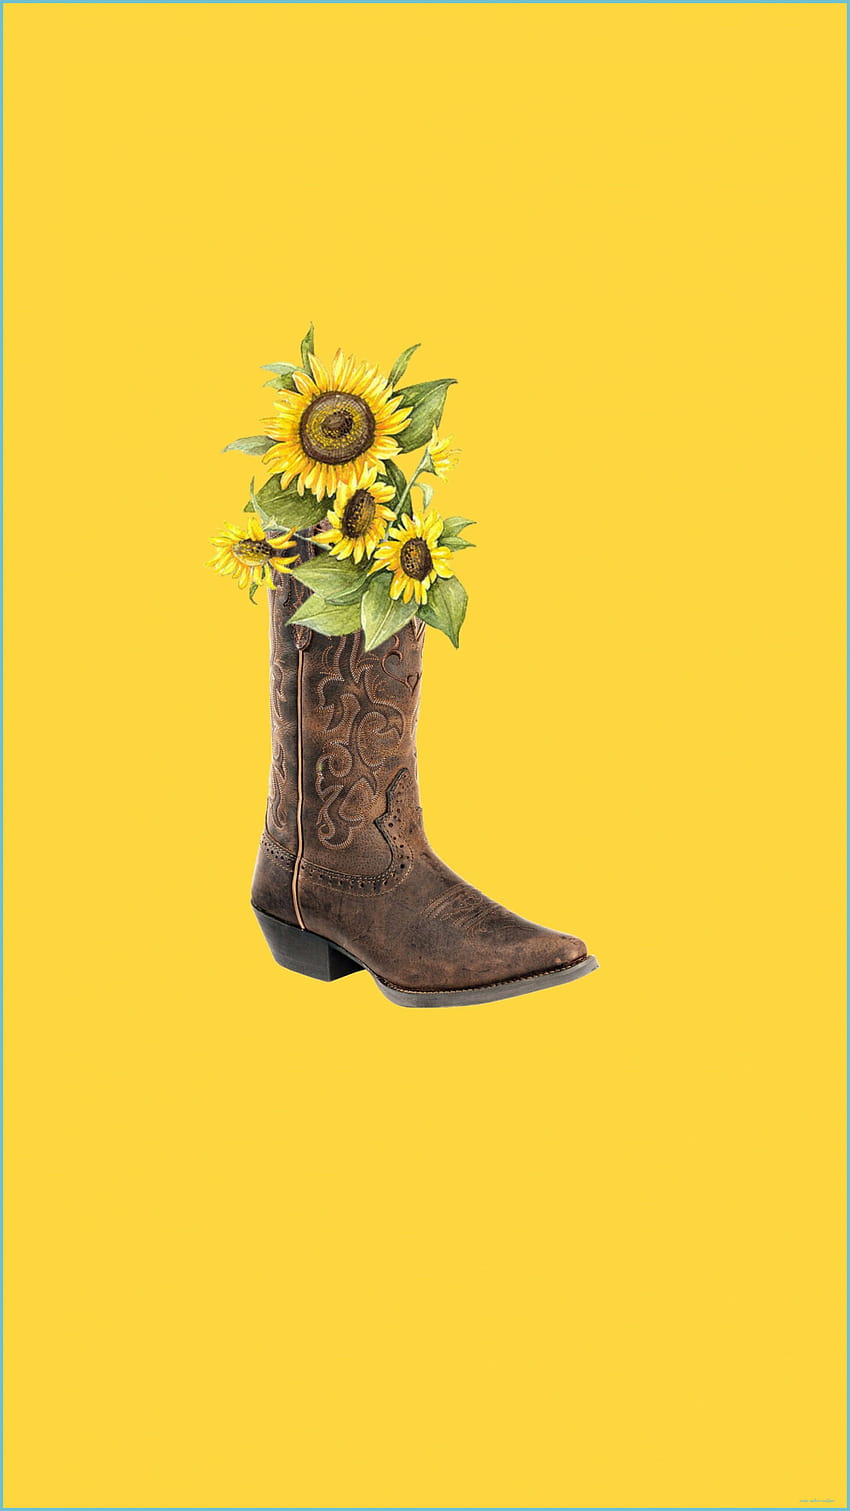 1920x1080px, 1080P Free download | Cowgirl Sunflower Boots IPhone ...